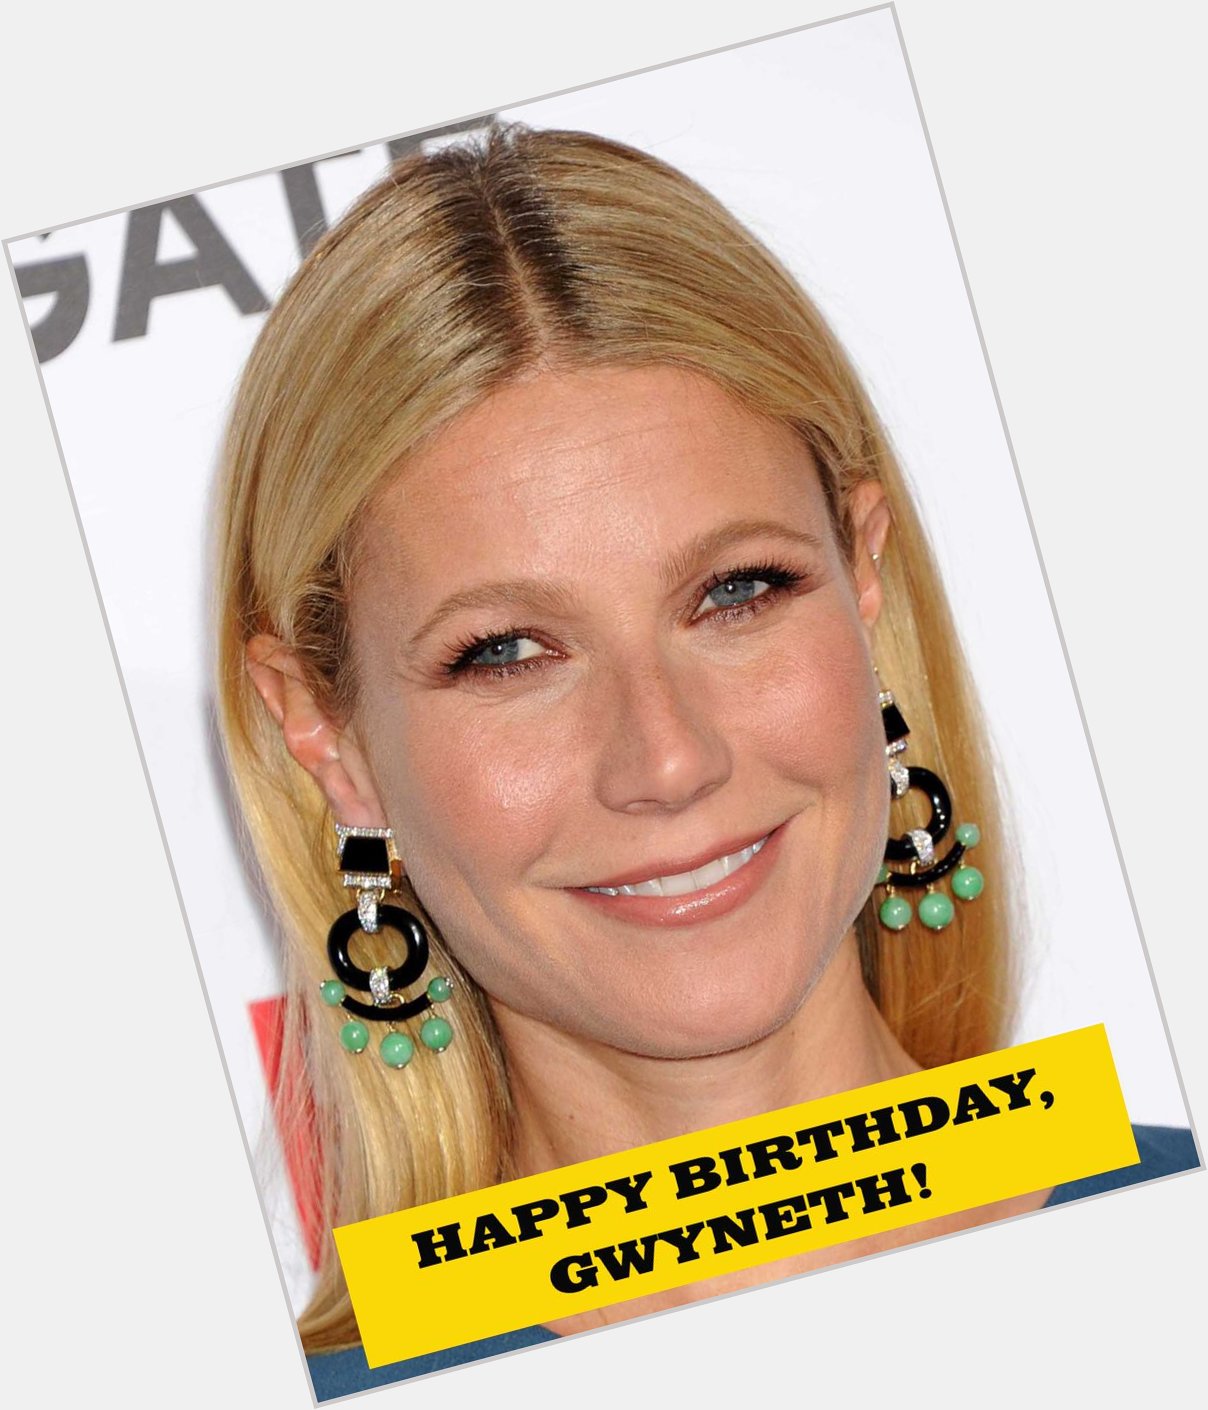 Happy Birthday to Gwyneth Paltrow! Catch her soon in \33 dias a story about  Pablo Picasso and the Guernica\". 